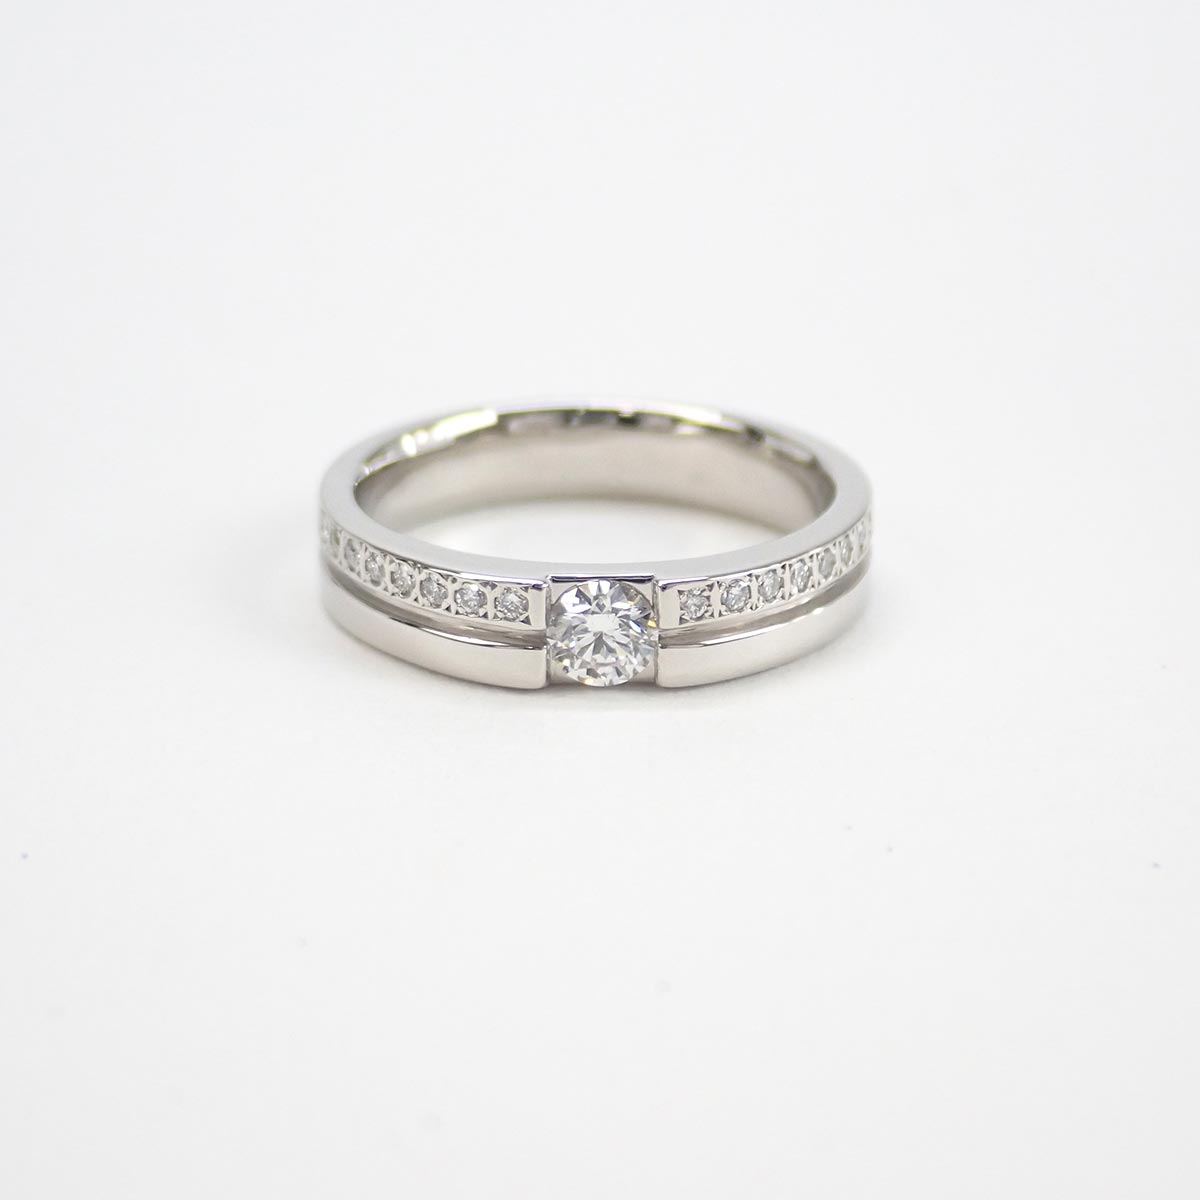 [LuxUness]  4℃ Design D0.171ct, approx. Gauge 9.5 Ring - PT1000 with Diamond, 9.5 Silver For Women【Pre-Owned】 in Excellent condition